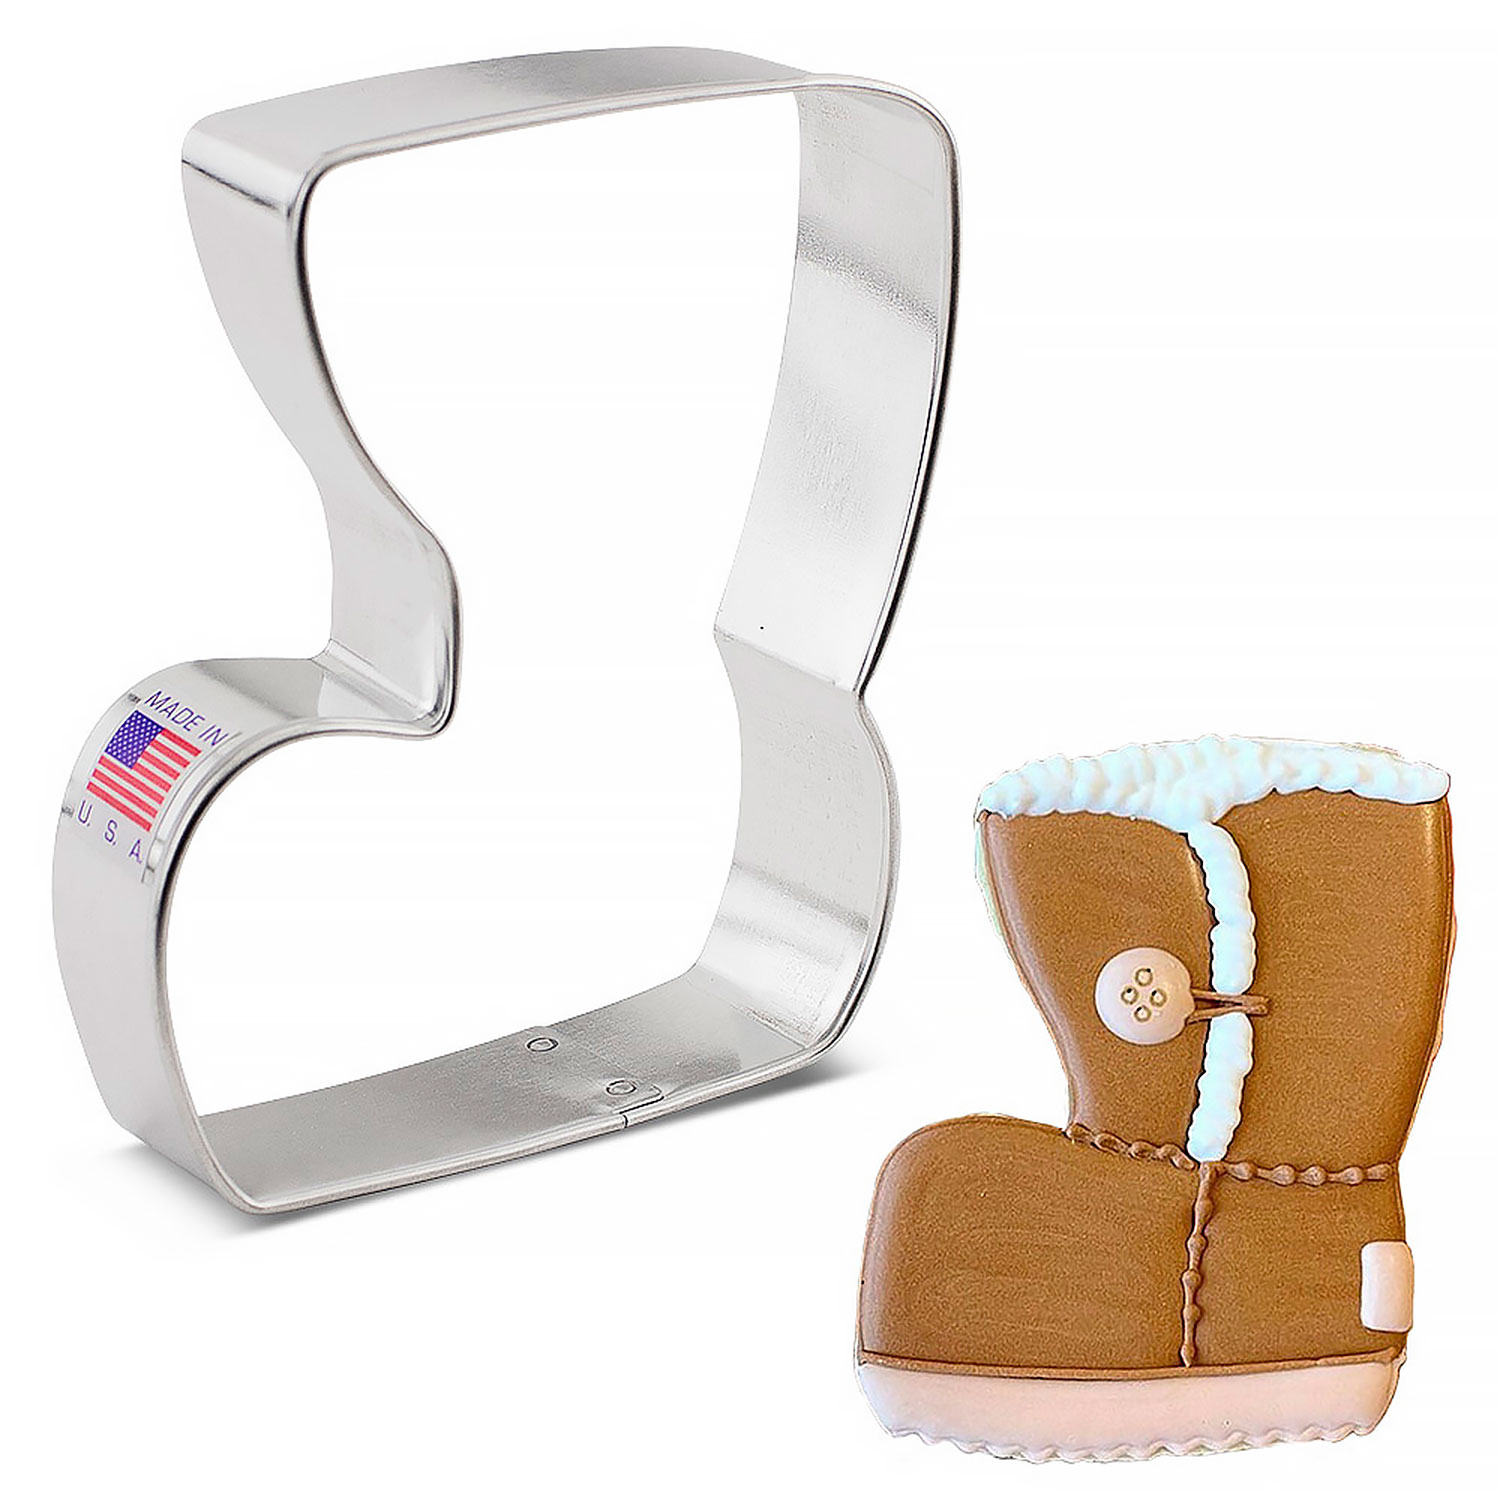 Rubber Boot Cookie Cutter